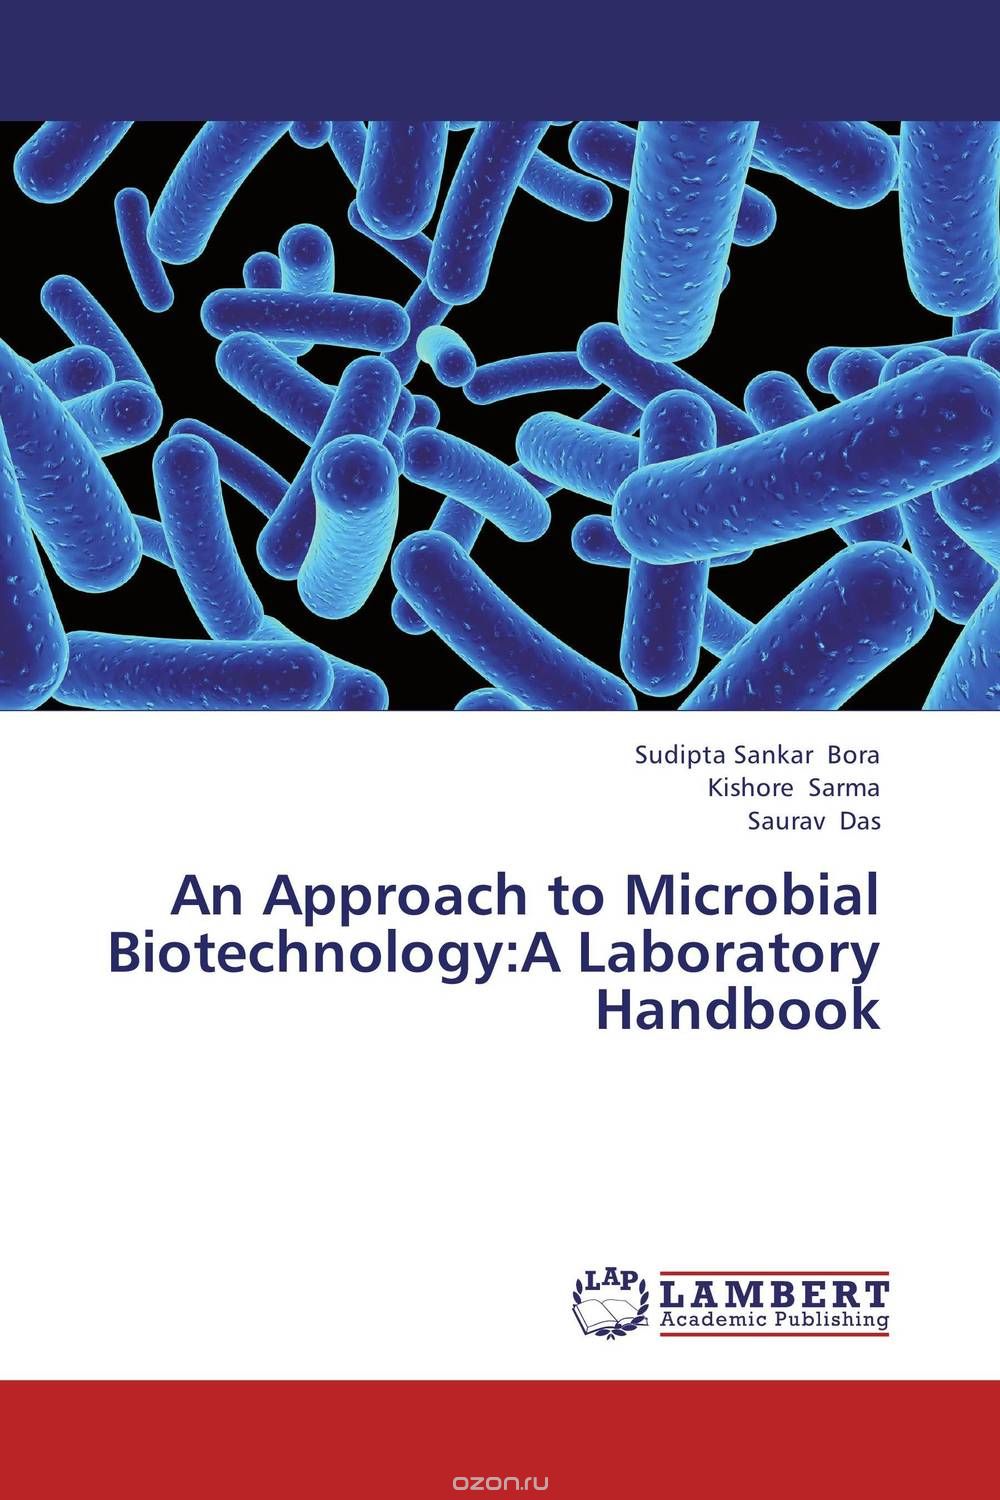 An Approach to Microbial Biotechnology:A Laboratory Handbook